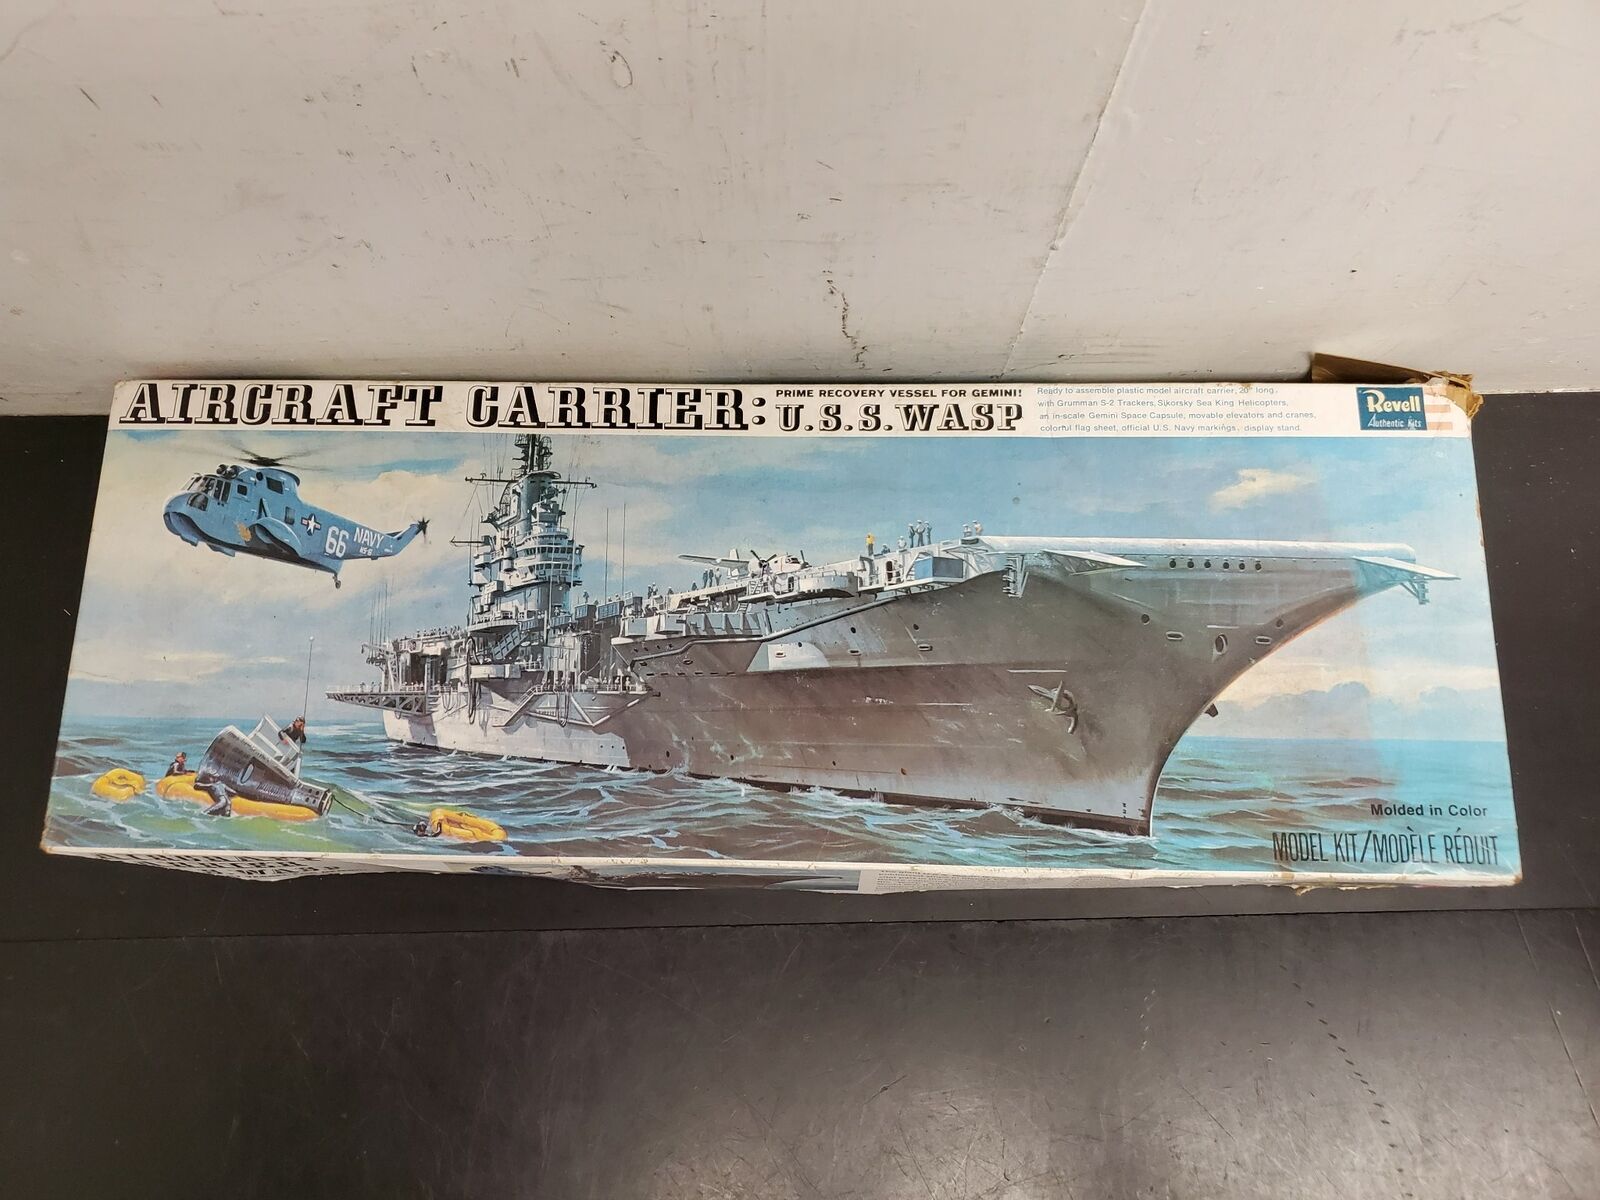 Vtg Revell Aircraft Carrier: U.s.s Wasp-prime Recovery Vessel For Gemini!vf Cond